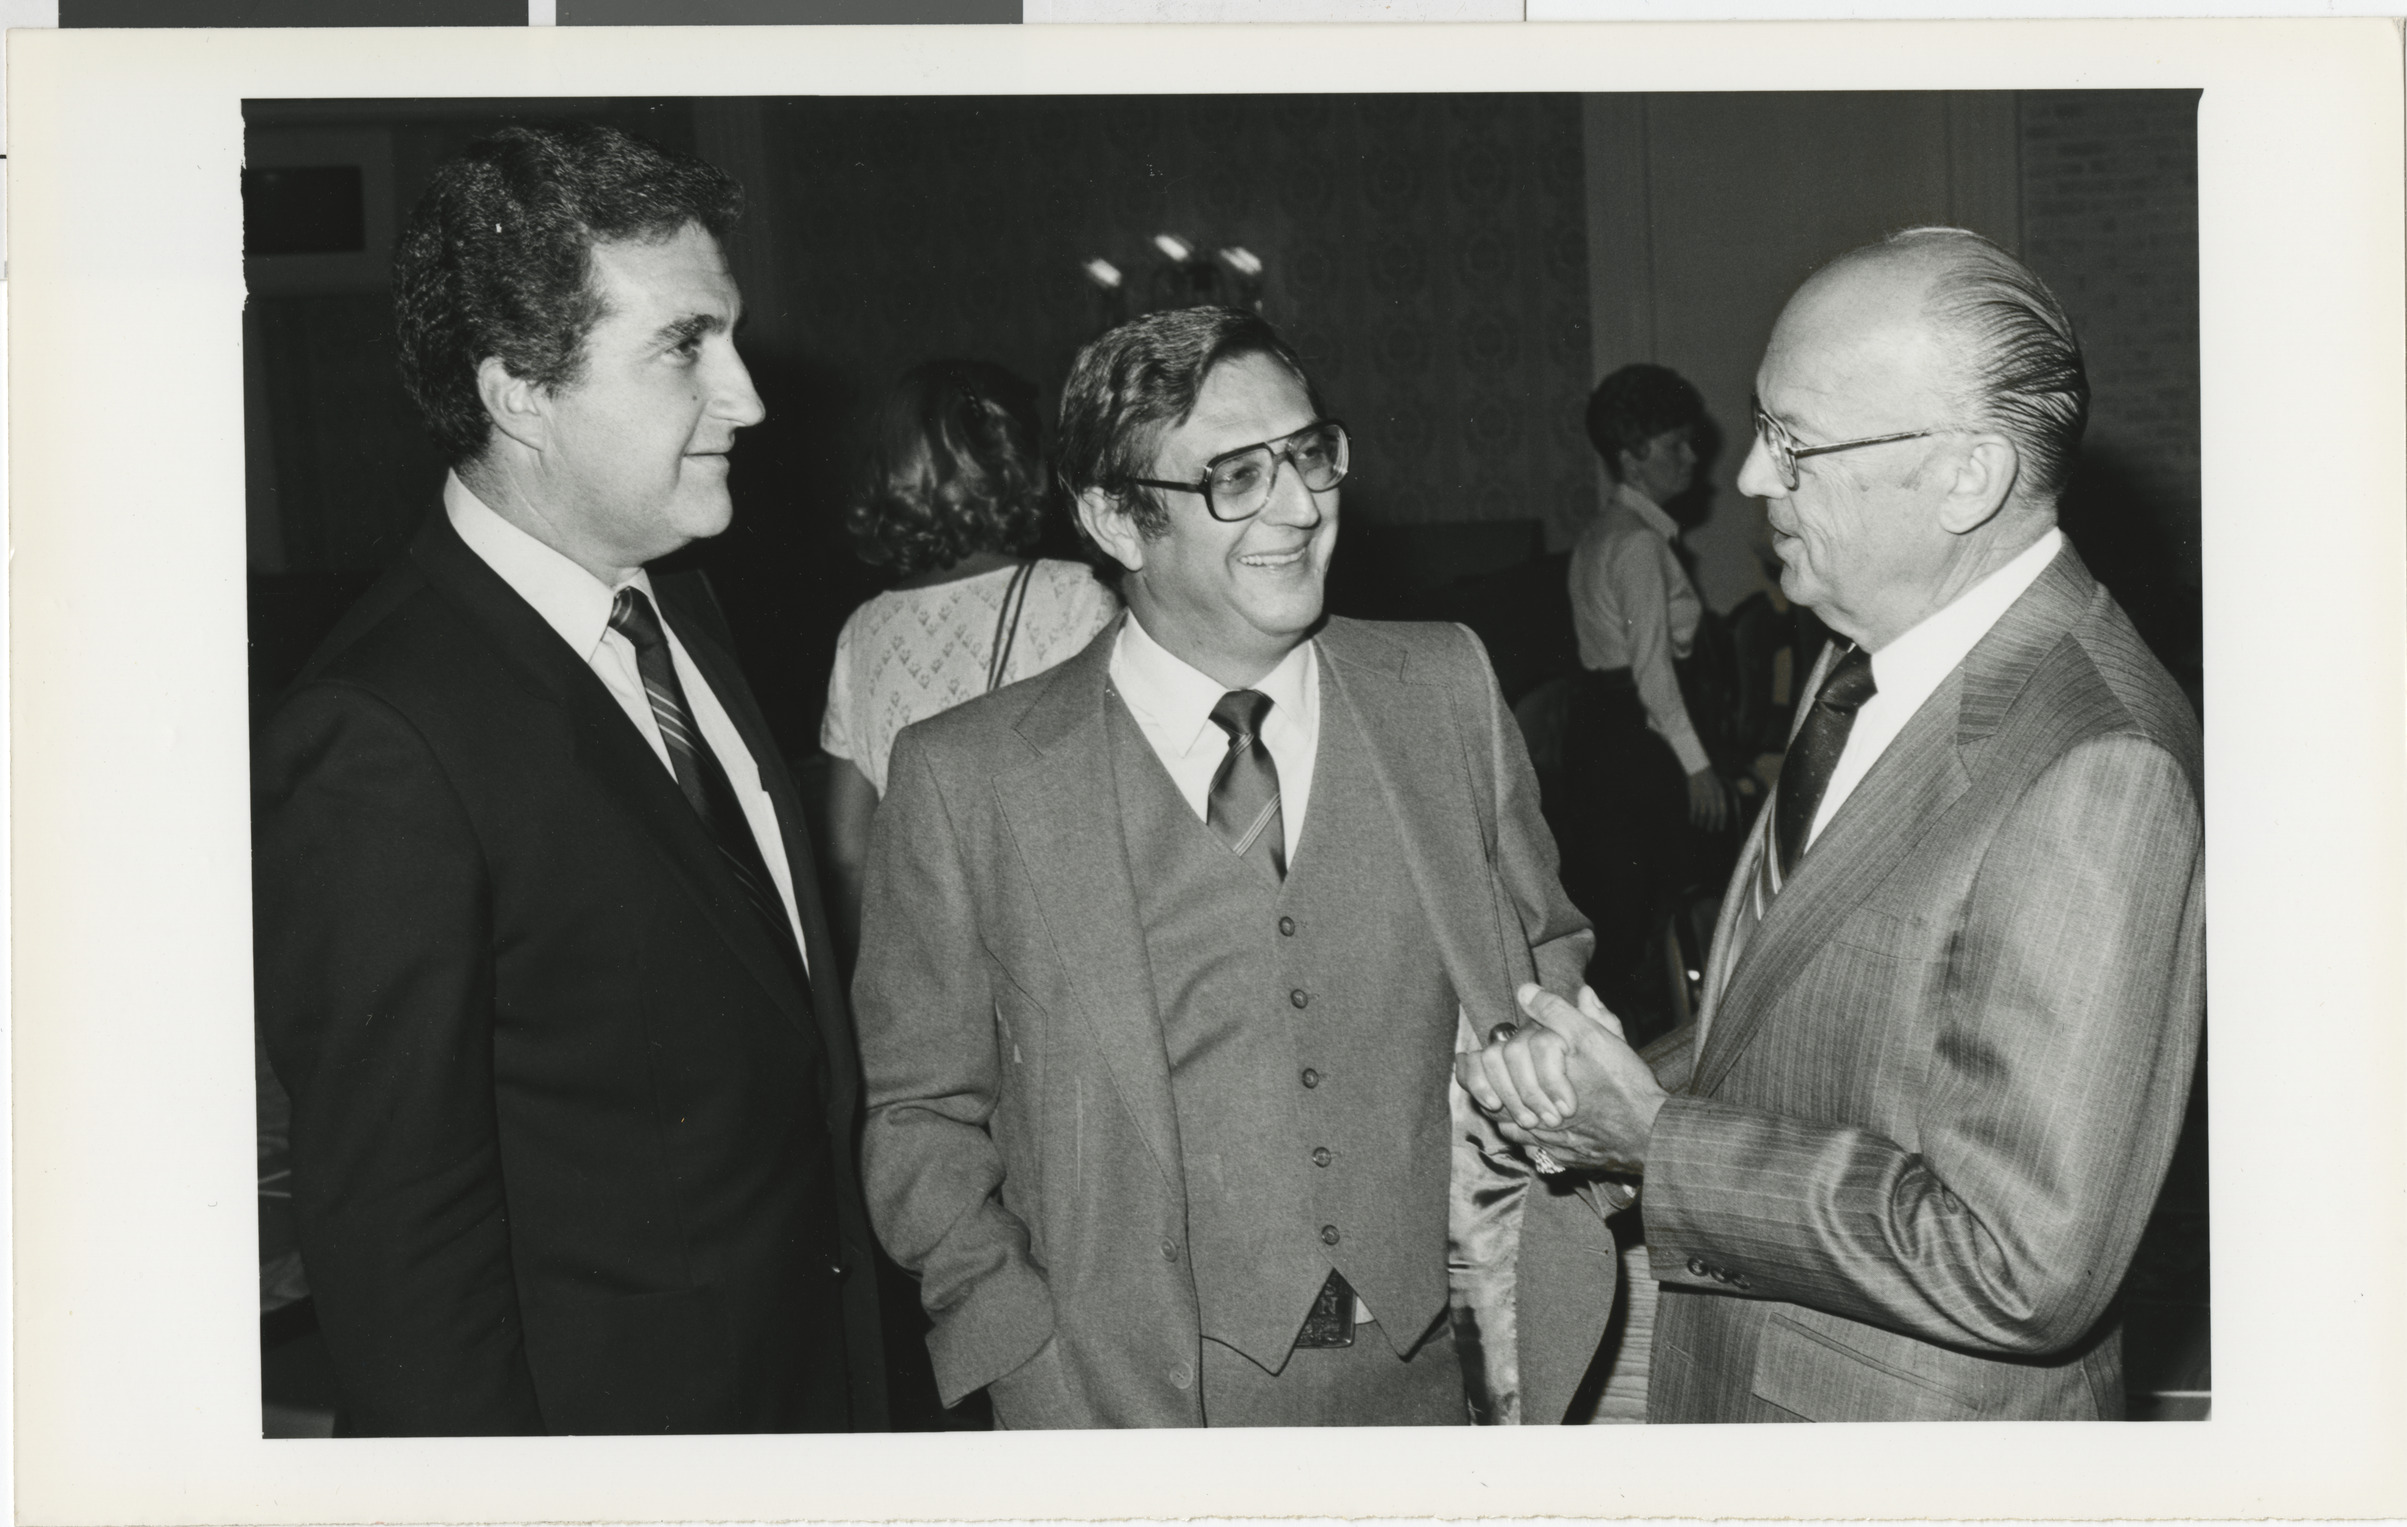 Photograph of Ron Lurie (left) with two men